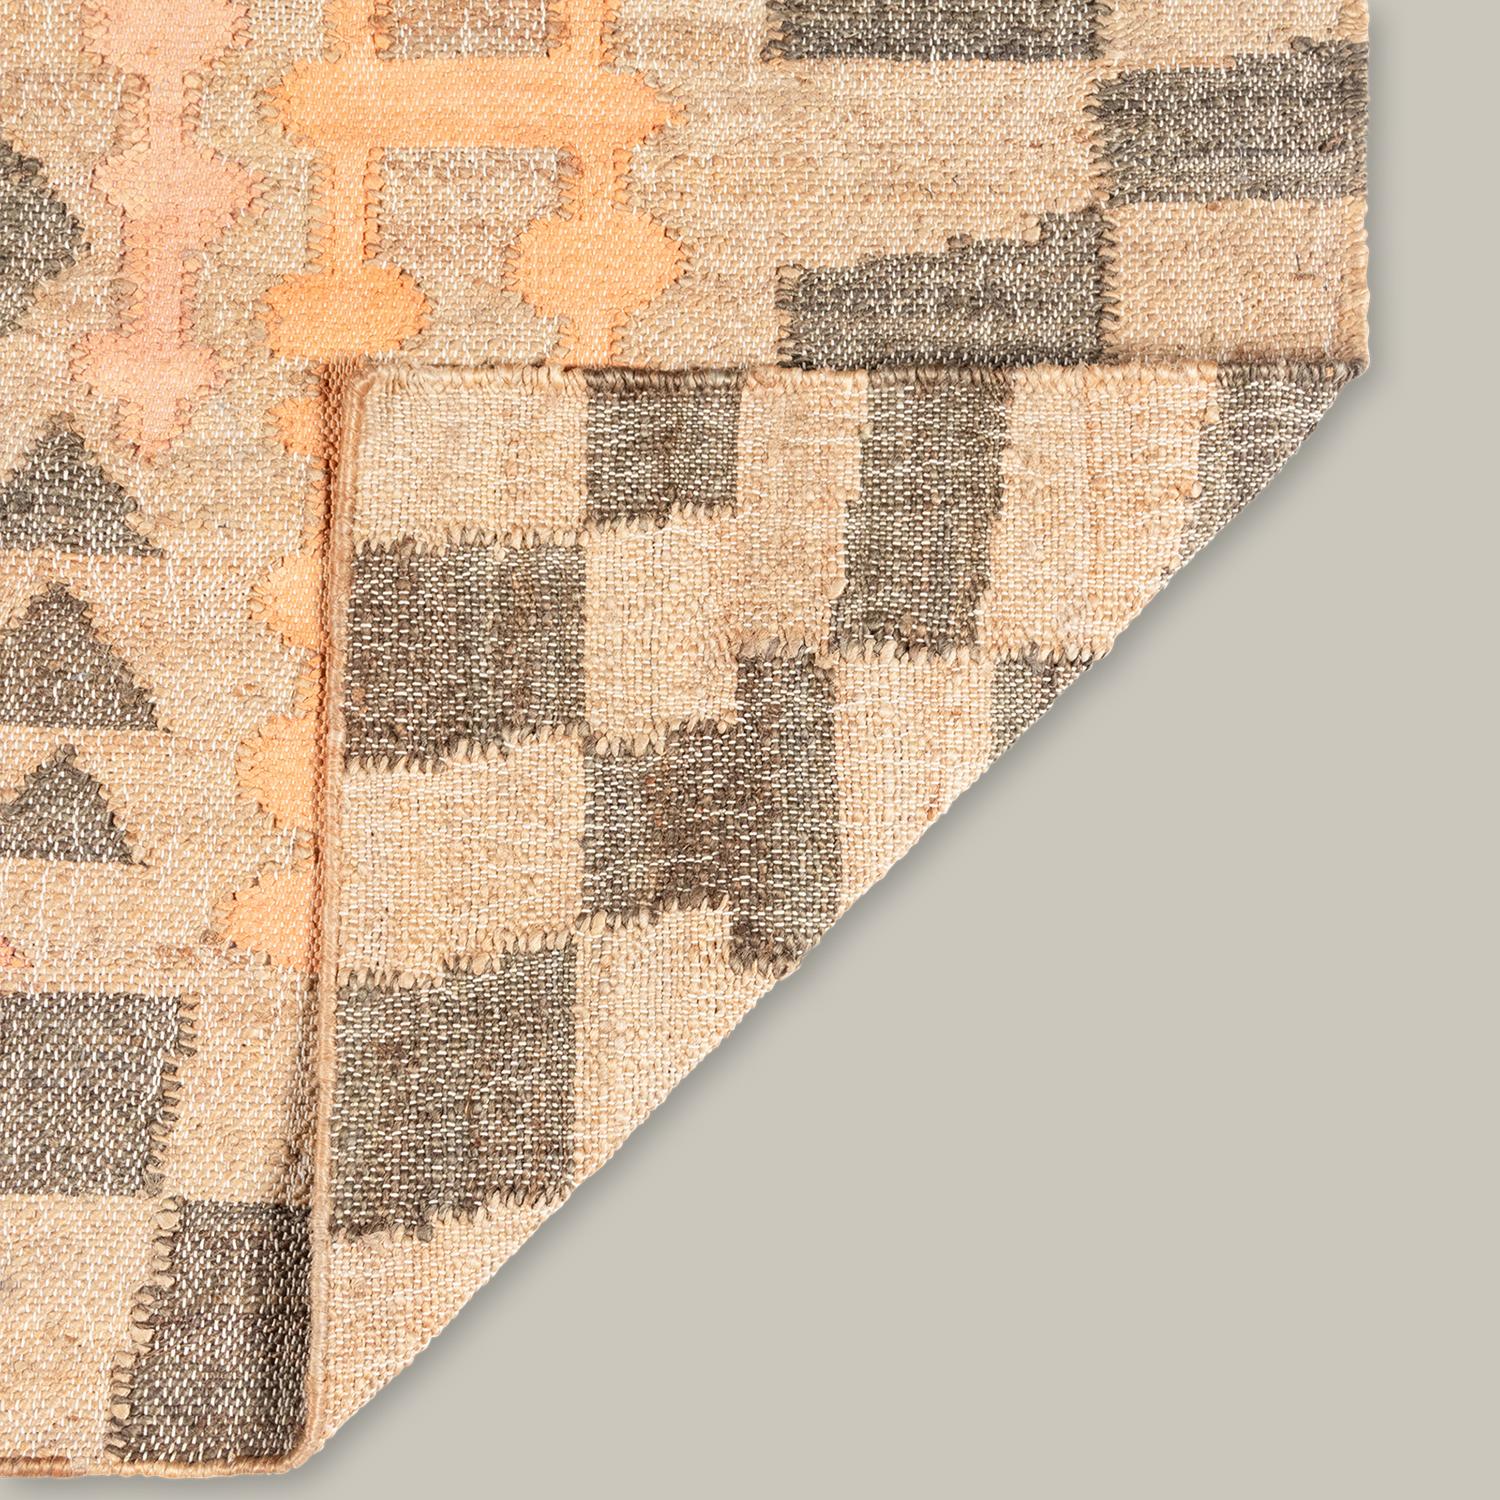 Grounded in the beauty of raw materials, the Gurara Collection’s tones and textures are inspired by Brancusi. The interwoven pattern, constructed of jute, varies in its colors and shapes but is always connected by the maker’s technique. Sculptural